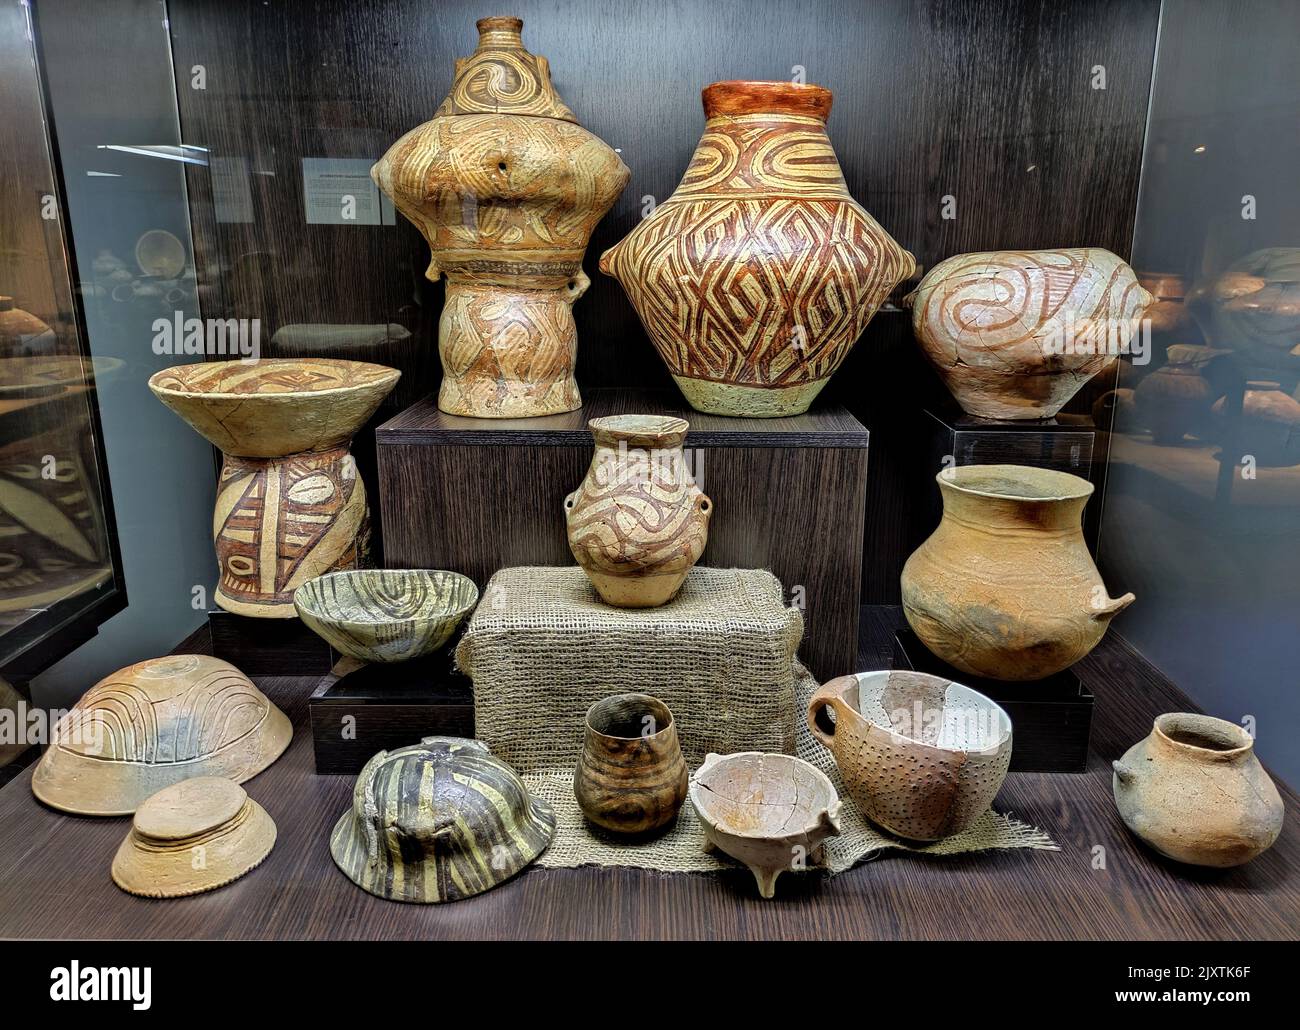 KYIV, UKRAINE - SEPTEMBER 7, 2022 - Artifacts of the Cucuteni–Trypillia culture are on display at the Trypillia Culture: The Roots of the Unconquered Stock Photo